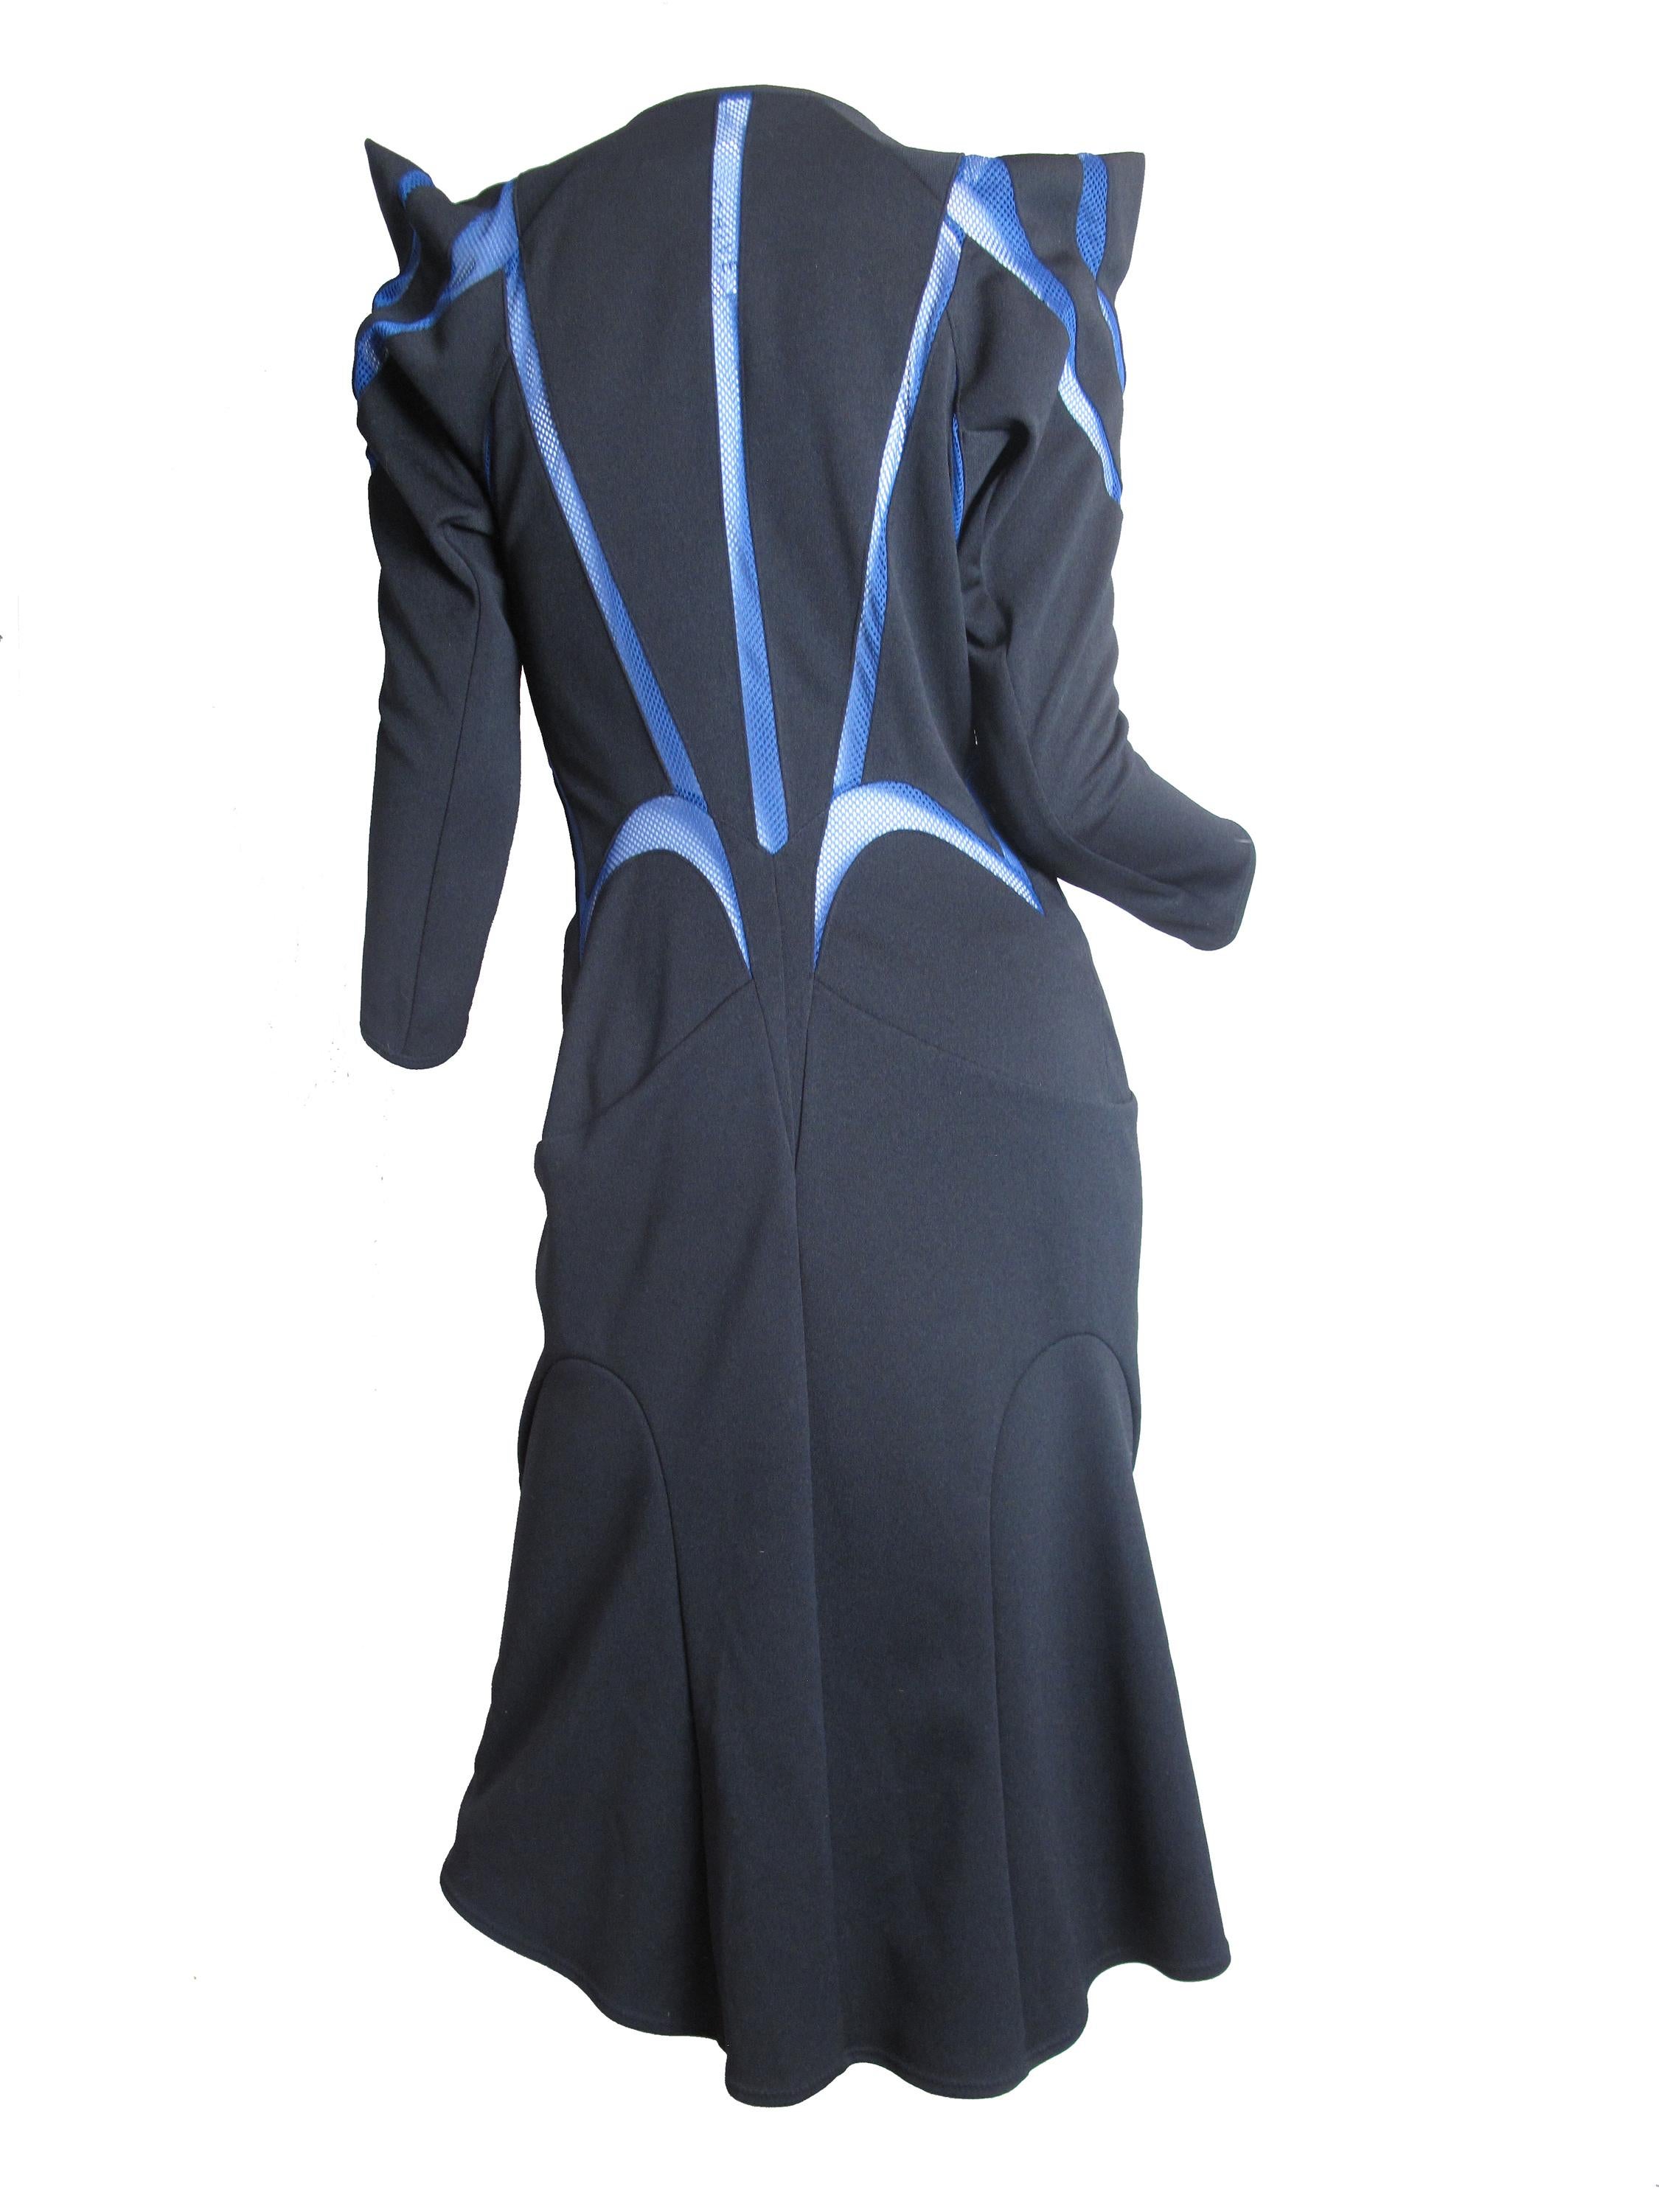 Junya Watanabe Runway Black and Blue with Mesh Inserts Dress, 2013 spring.  Condition: Excellent, original tags still attached.  Size M ( mannequin is US size 6) 
